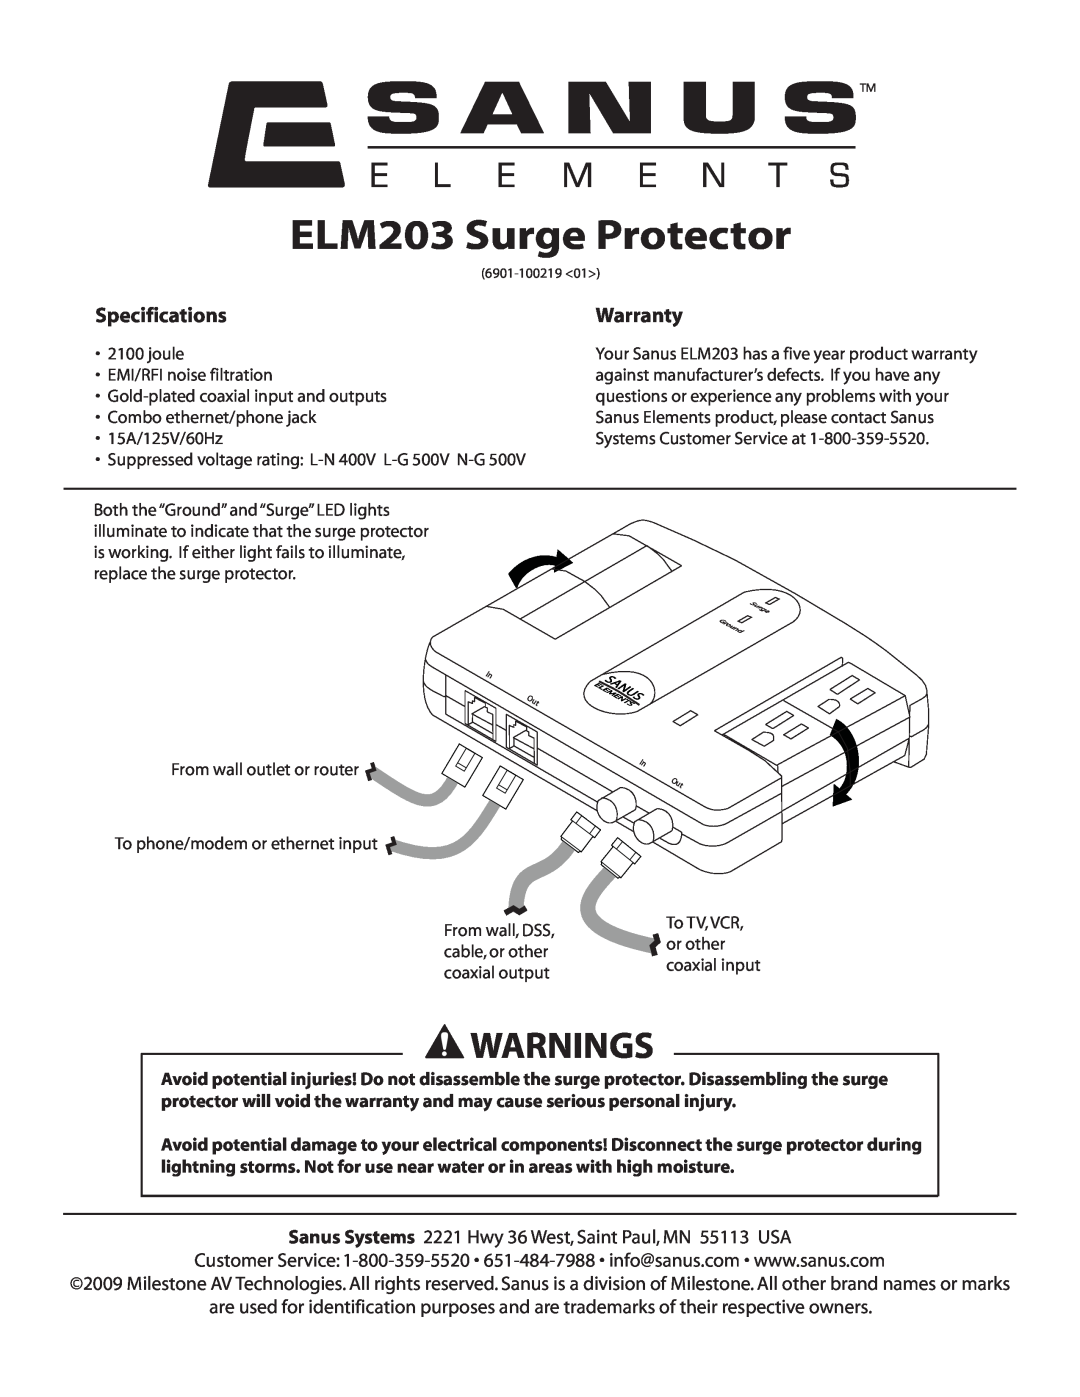 Sanus Systems specifications Warnings, ELM203 Surge Protector, Specifications, Warranty 